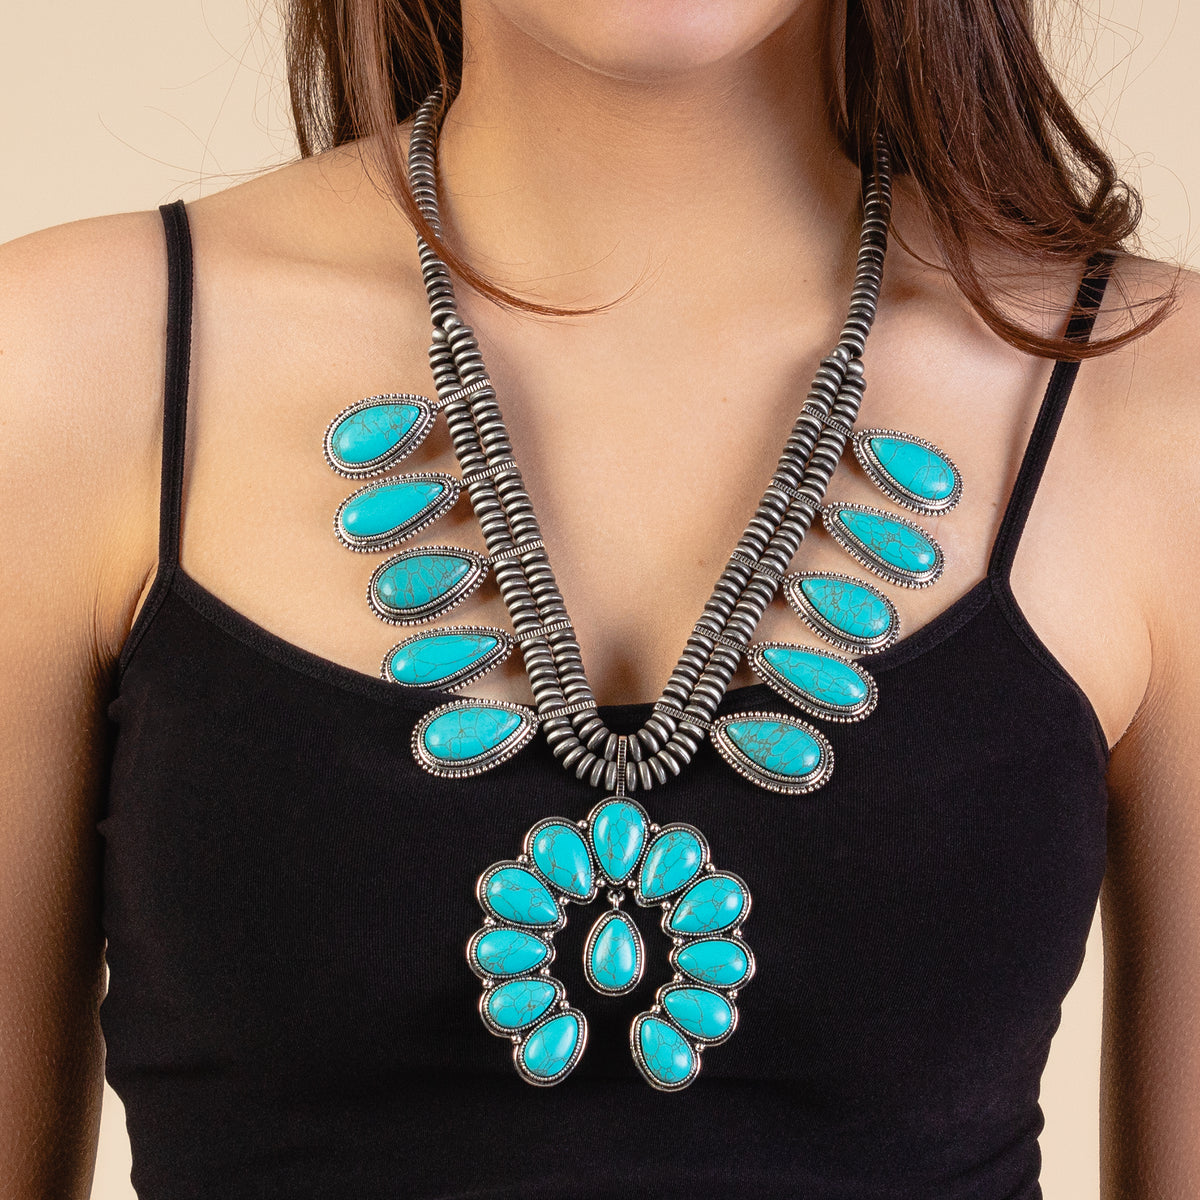 72858 - Squash Blossom Necklace - Turquoise & Silver